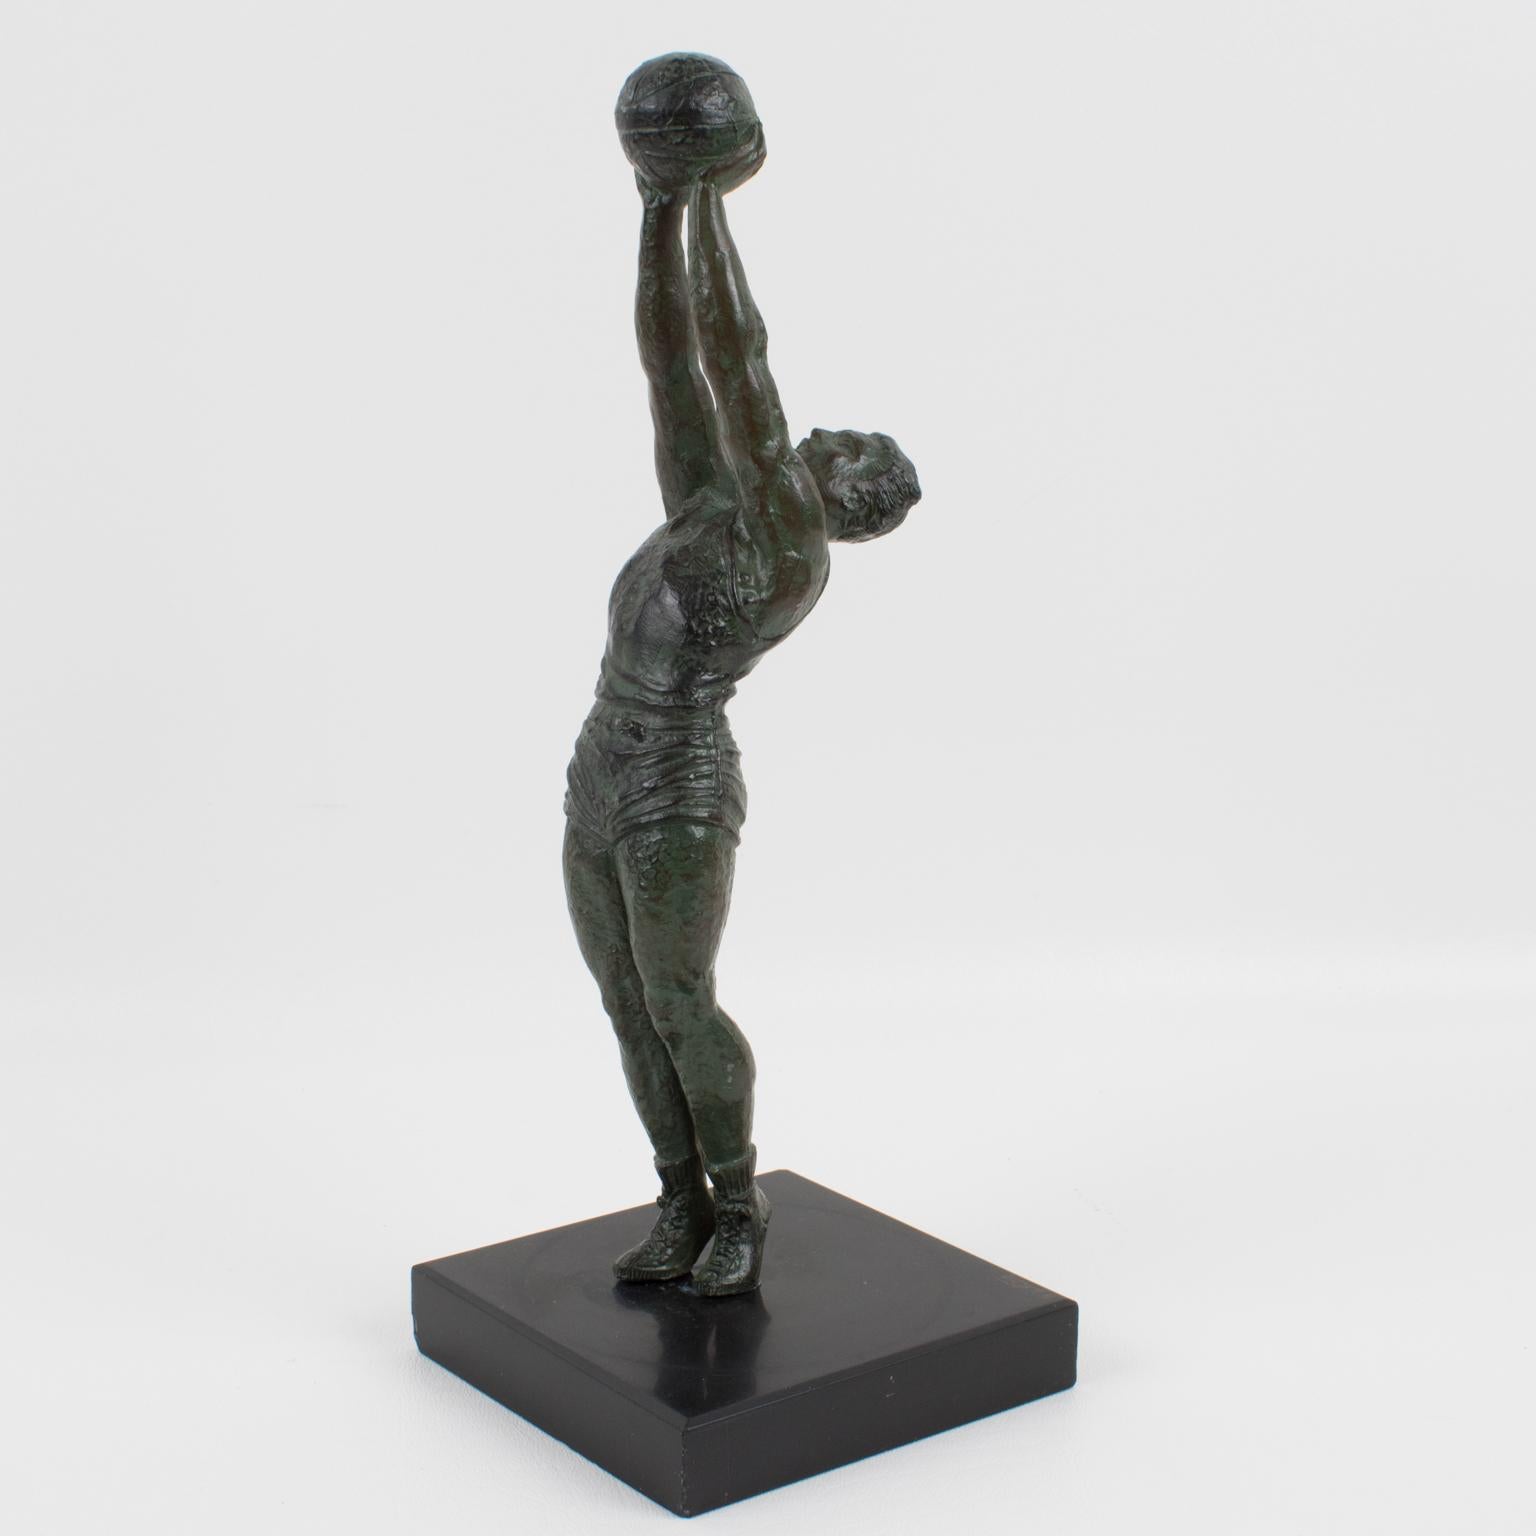 Lovely Art Deco bronze sculpture by French artist Max le Verrier (1891 - 1973). Very interesting sports memorabilia with a basketball player in action. Dark green patina to the statuette. The base is in black marble. Incised signature on the black